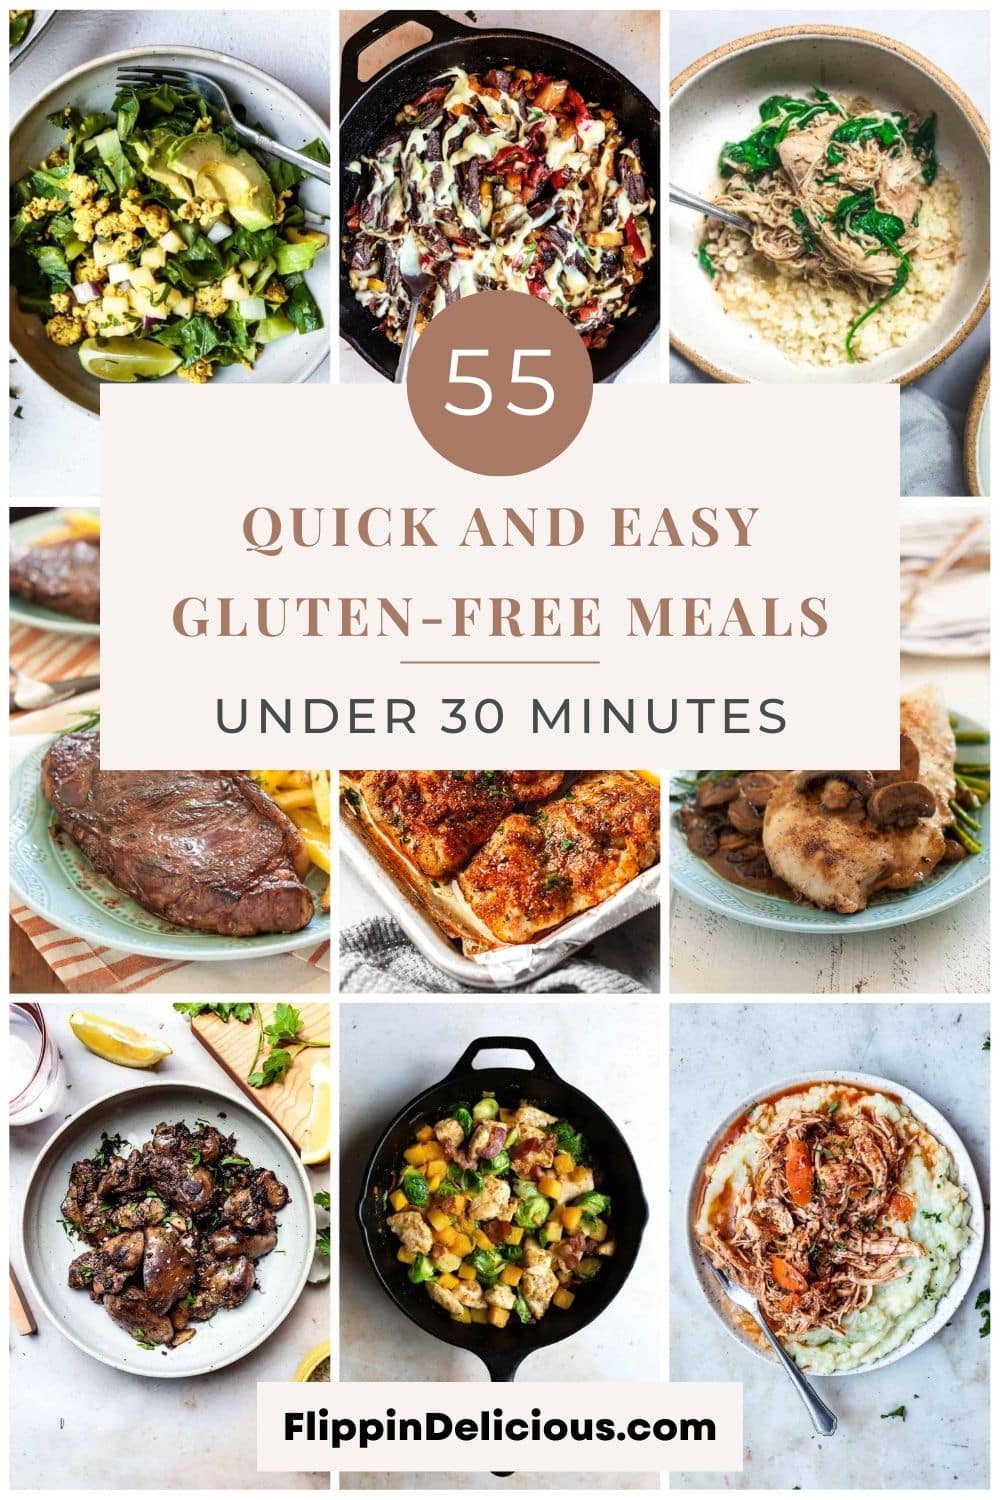 55 Quick and Easy Gluten-Free Meals (Under 30 Minutes) - Flippin' Delicious